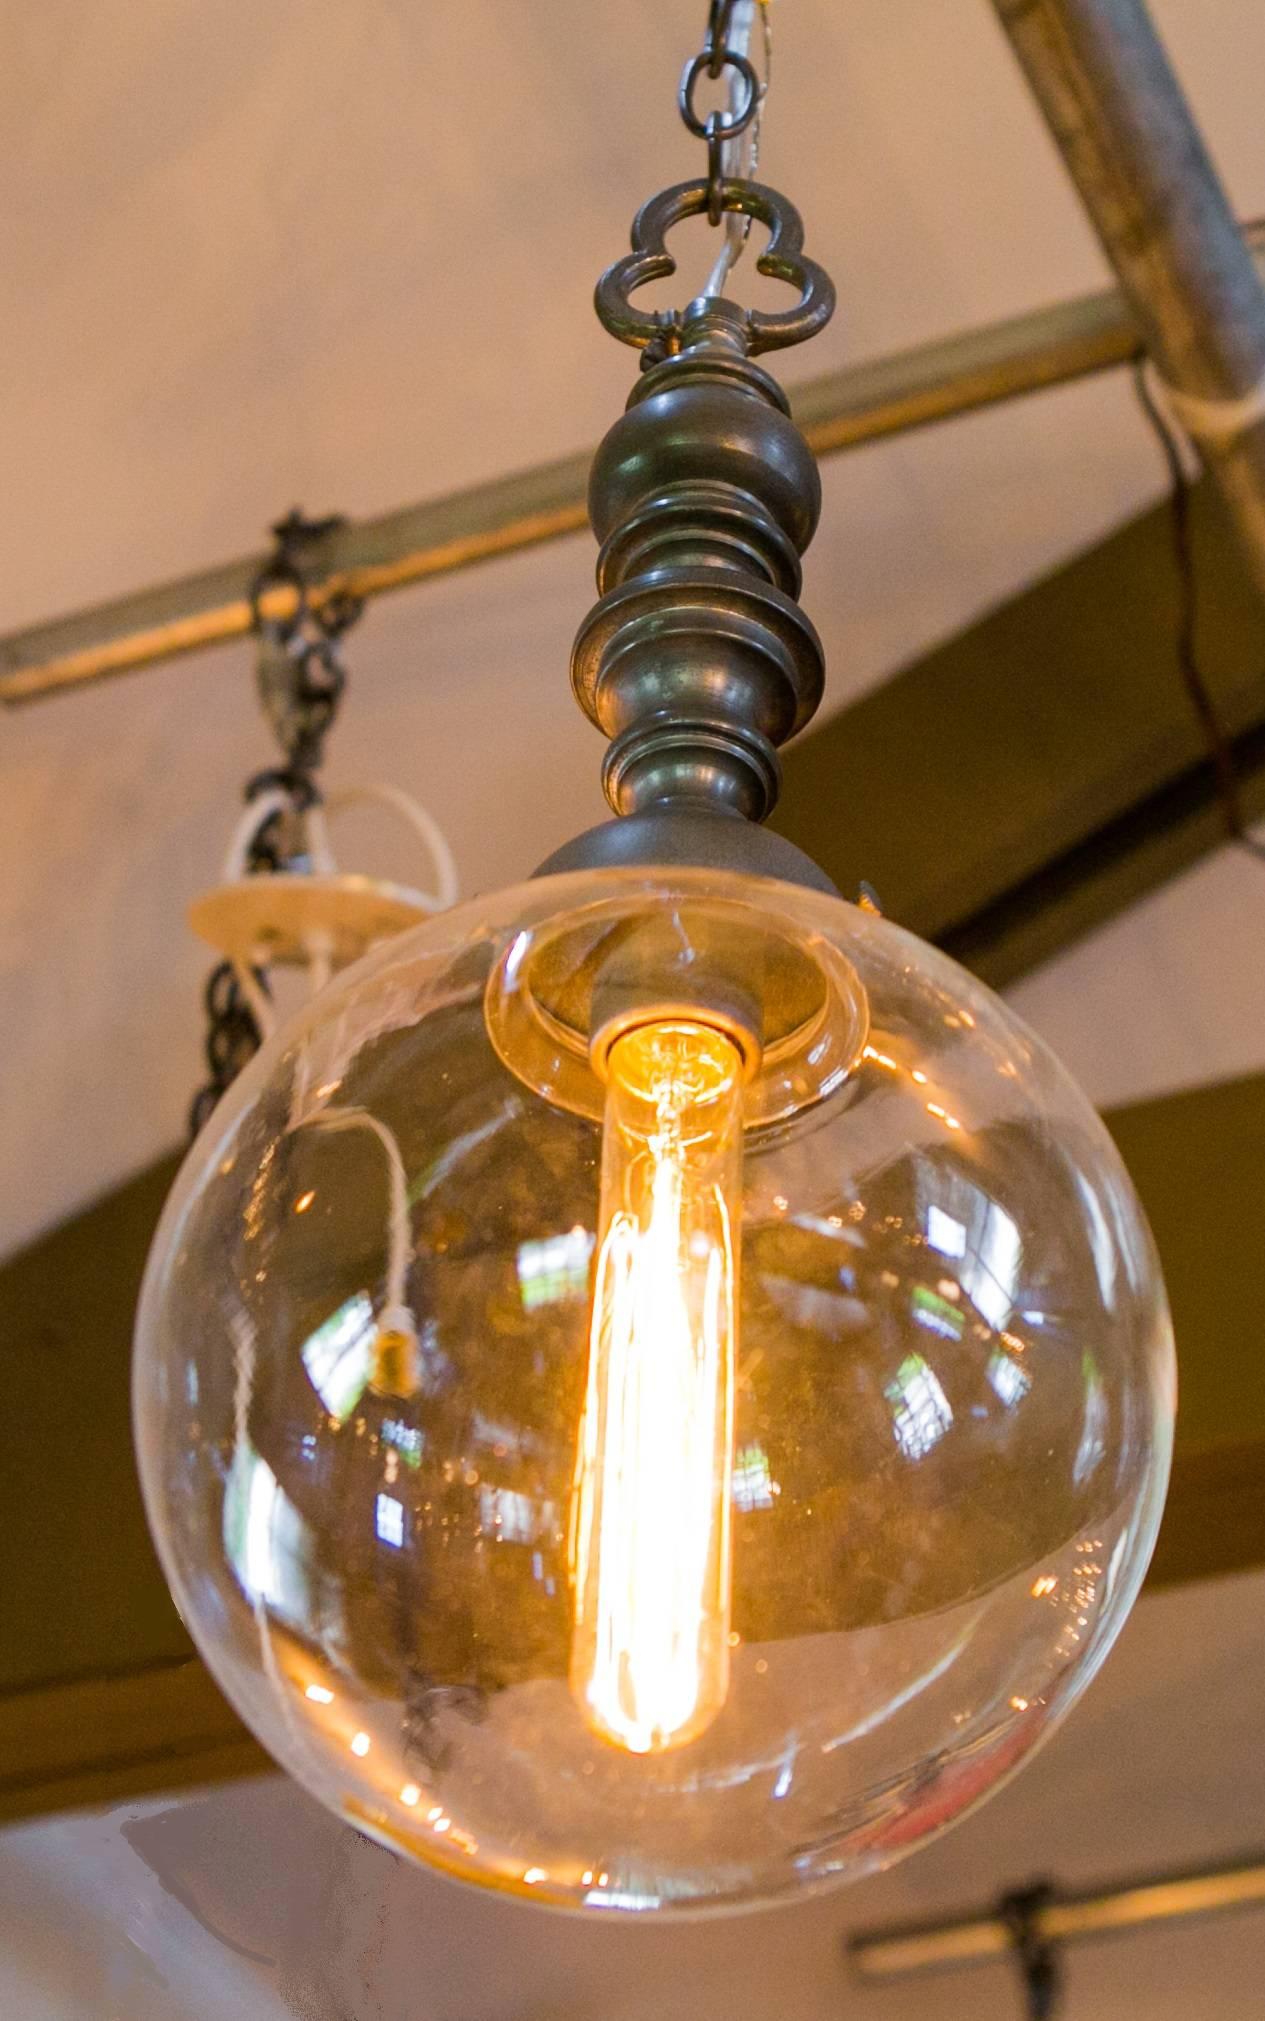 Unusual pewter pendant light with clear blown glass globe and trefoil finial. Our exclusive creation, made from vintage parts. Newly wired in the USA with all UL listed parts and a single porcelain Edison socket, painted silver to match the body.